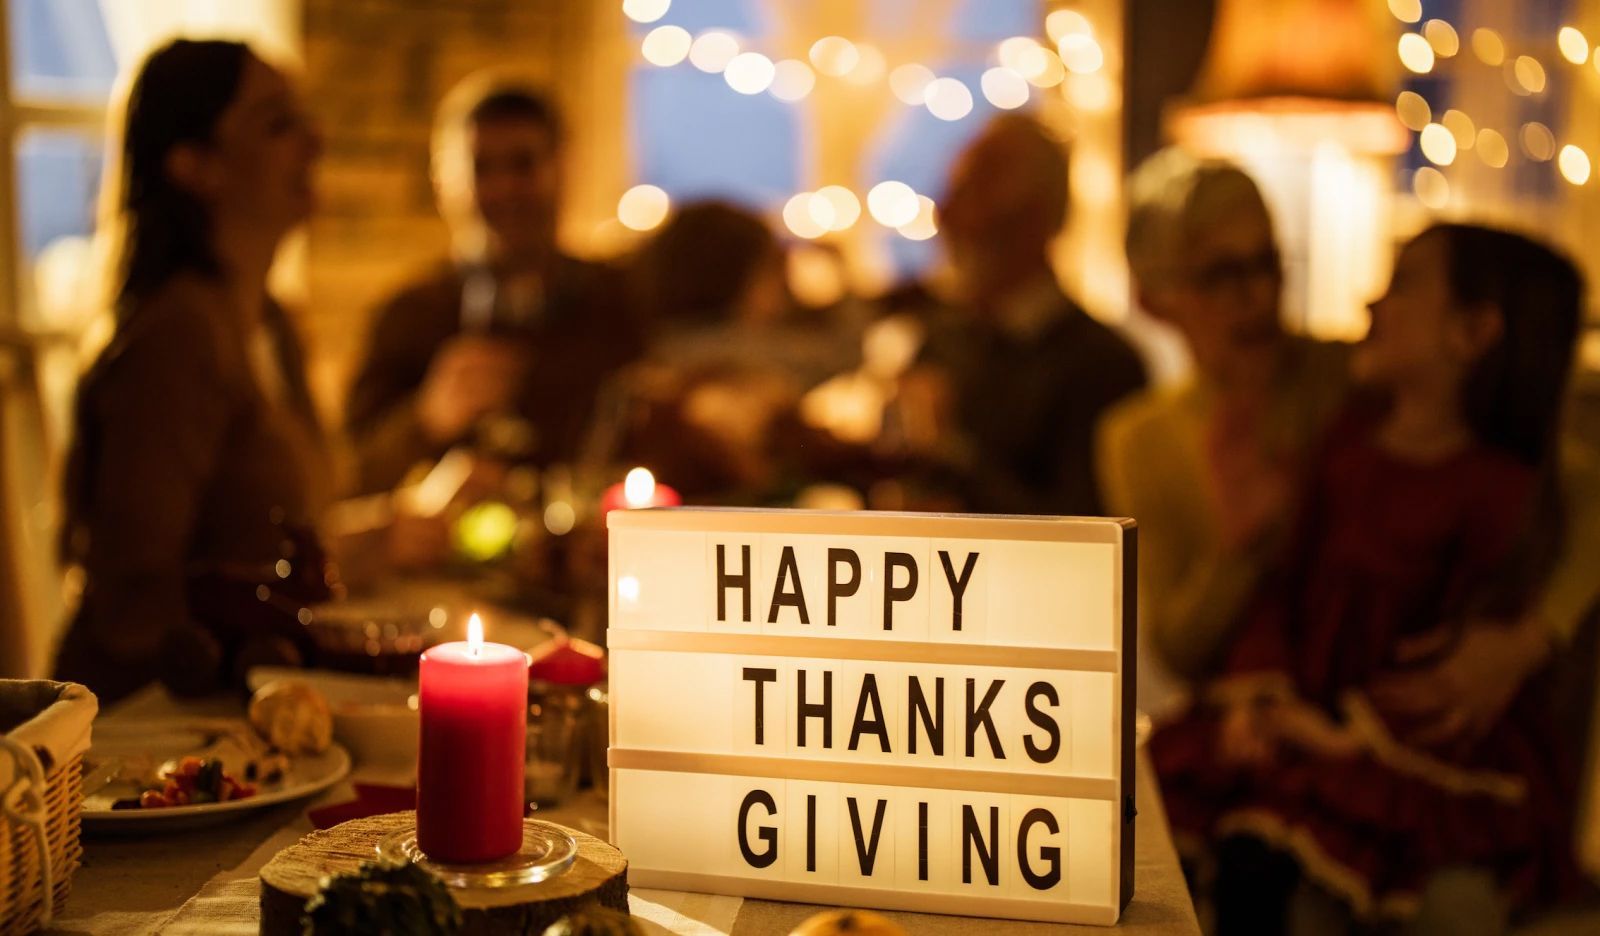 Don’t fall for woke misinformation about the origins of Thanksgiving